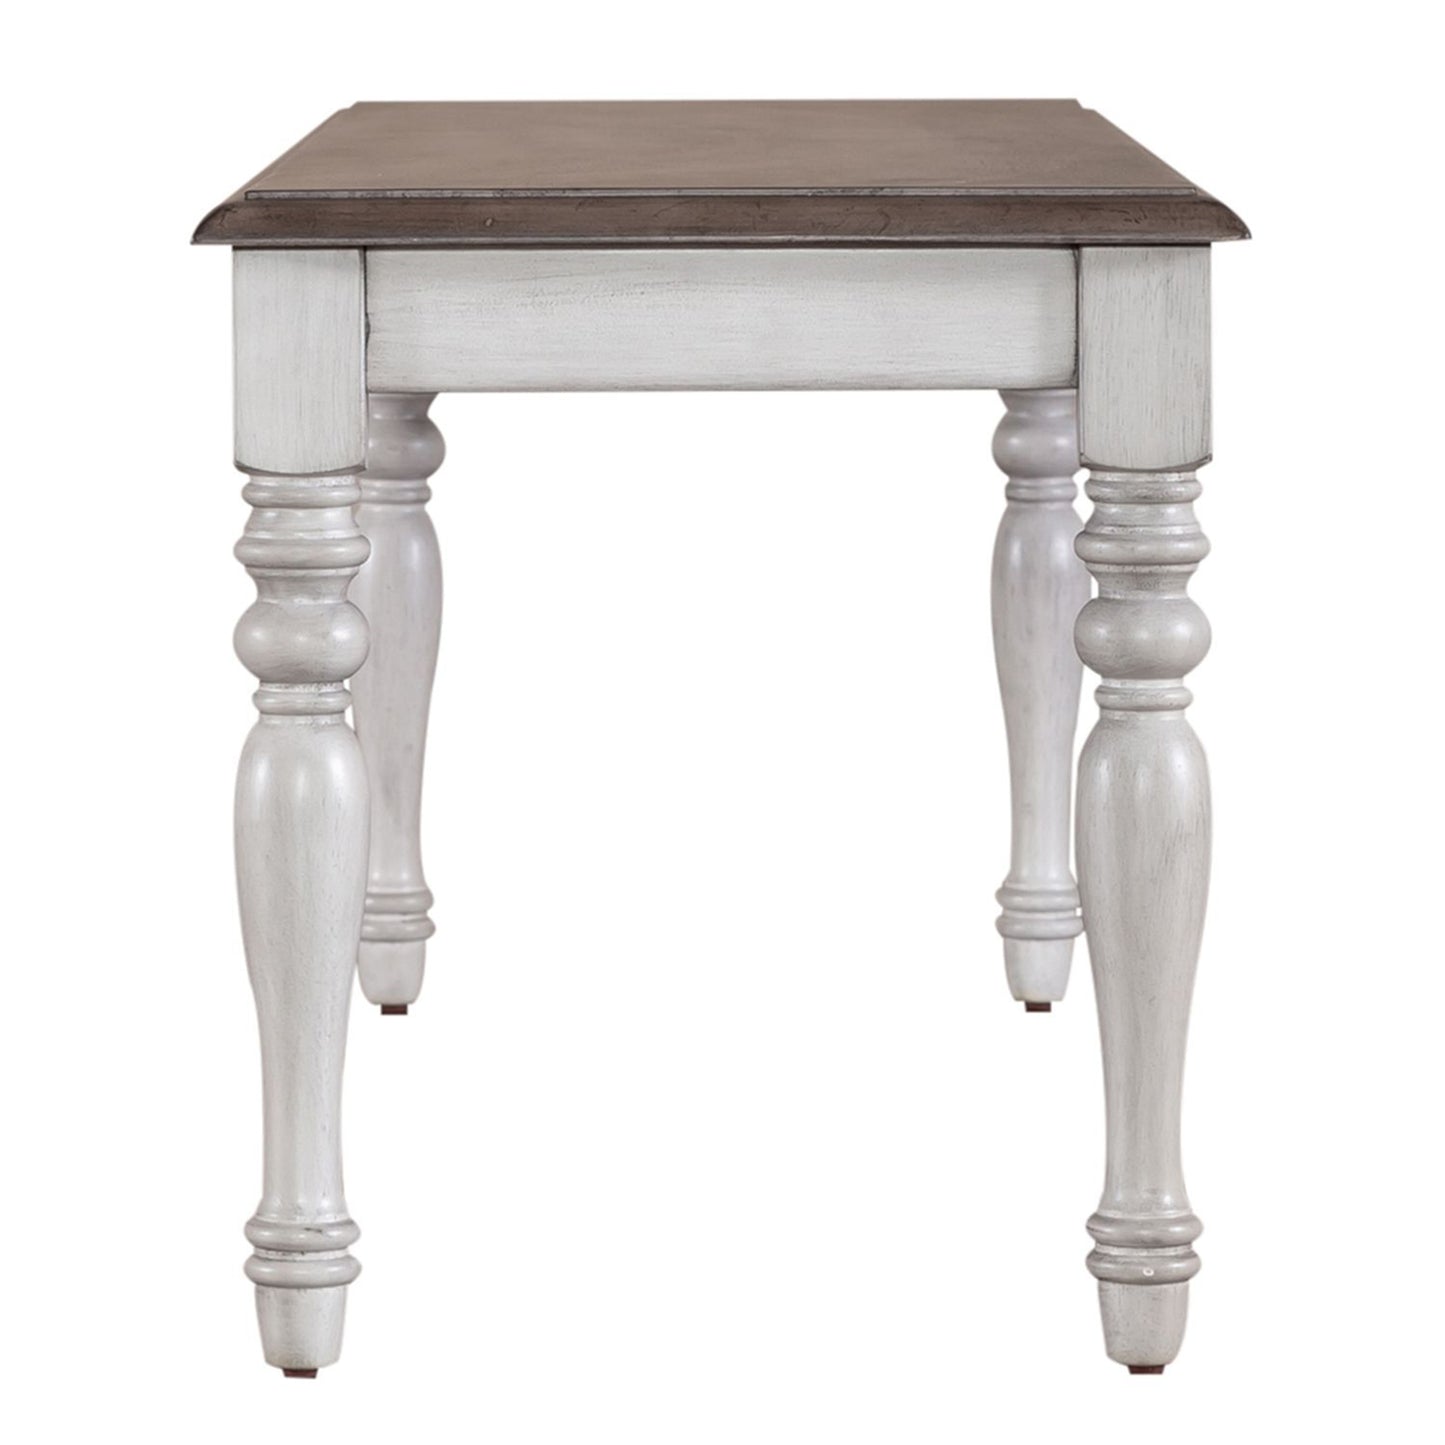 Chandria Dining Set - Extendable Rectangular Table with 4 Chairs and Bench, Antique White and Weathered Pine Finish